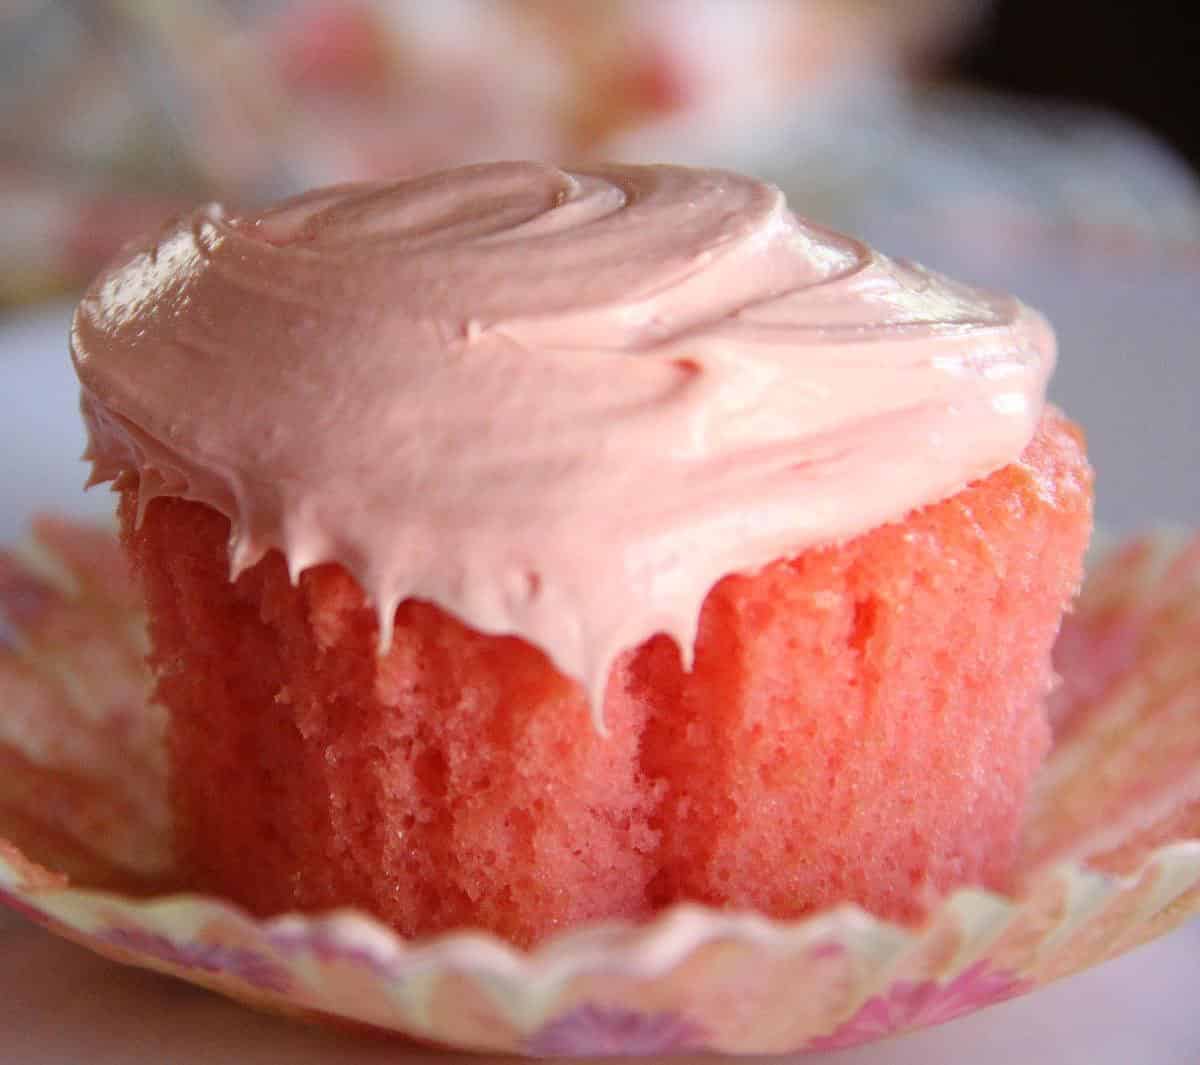  Bright and vibrant: These Kool-Aid cupcakes are sure to catch your eye!